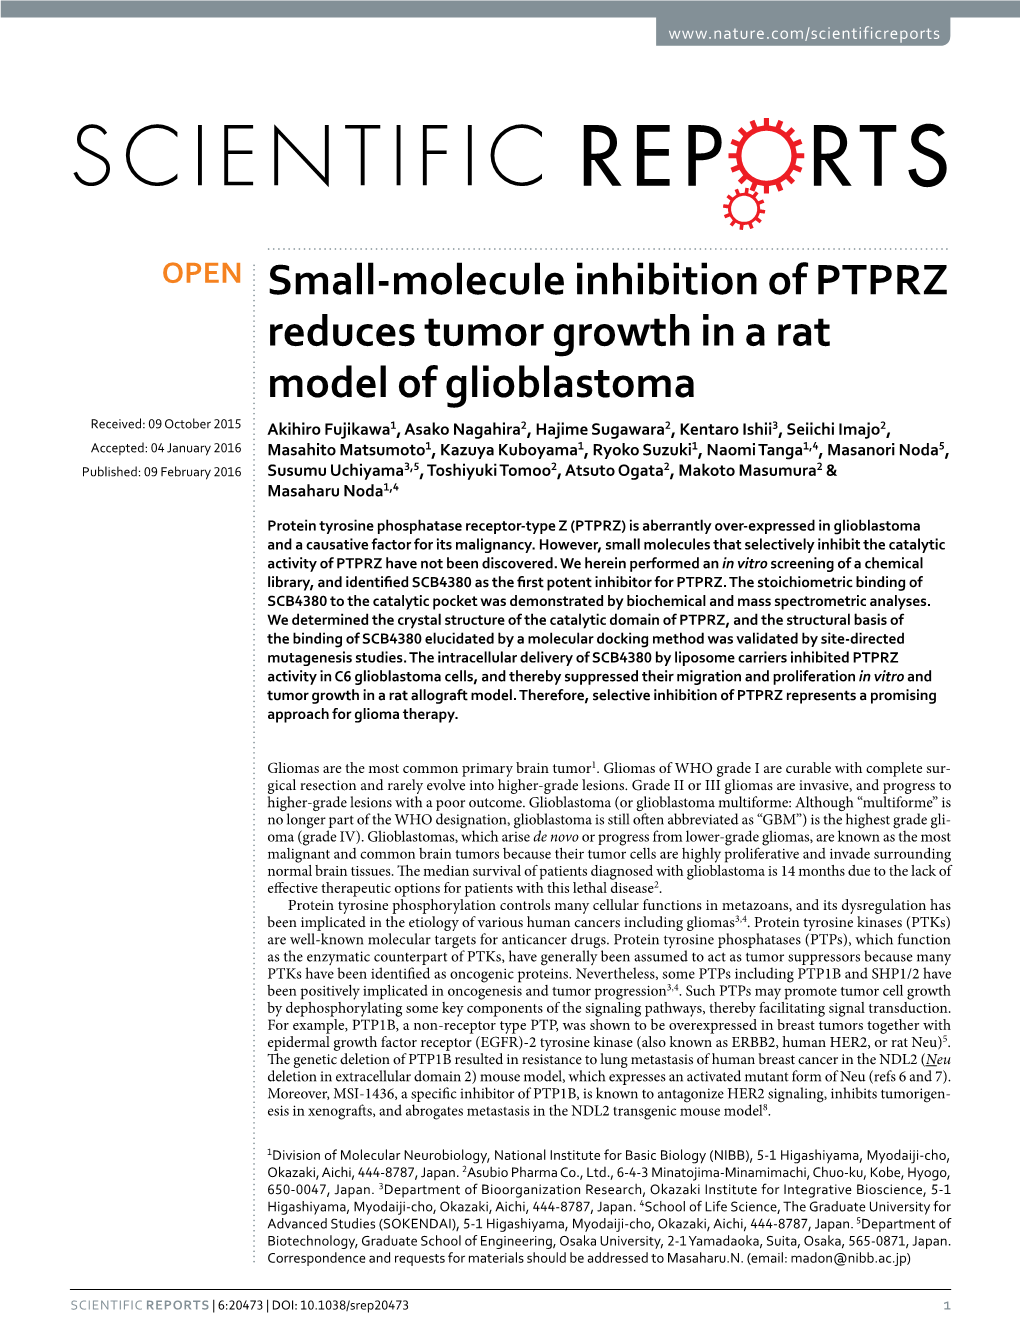 Small-Molecule Inhibition of PTPRZ Reduces Tumor Growth in a Rat Model